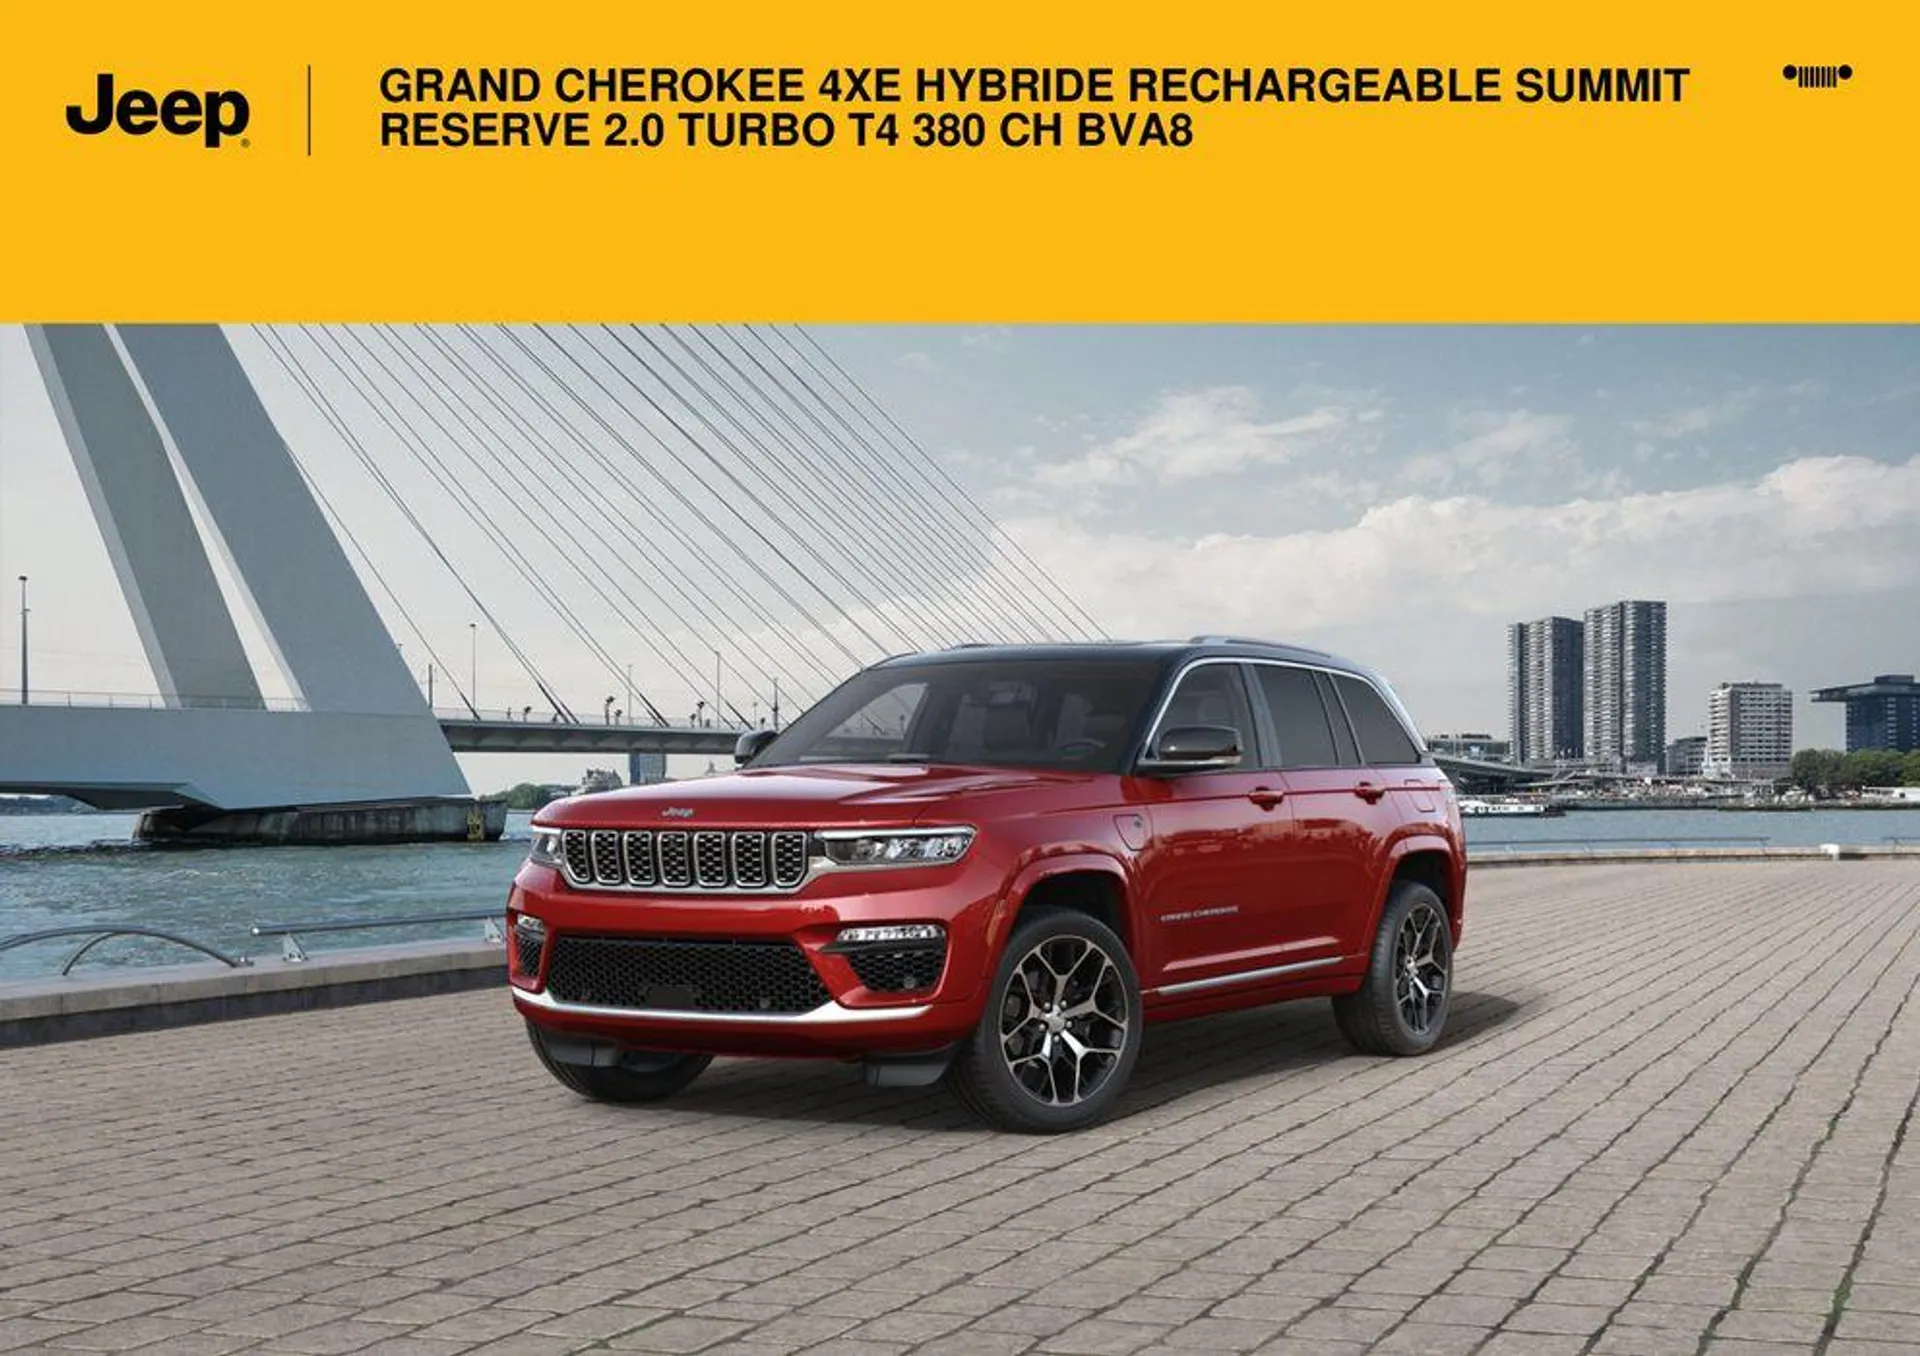 GRAND CHEROKEE 4XE HYBRIDE RECHARGEABLE SUMMIT RESERVE 2.0 TURBO T4 380 CH BVA8: - 1